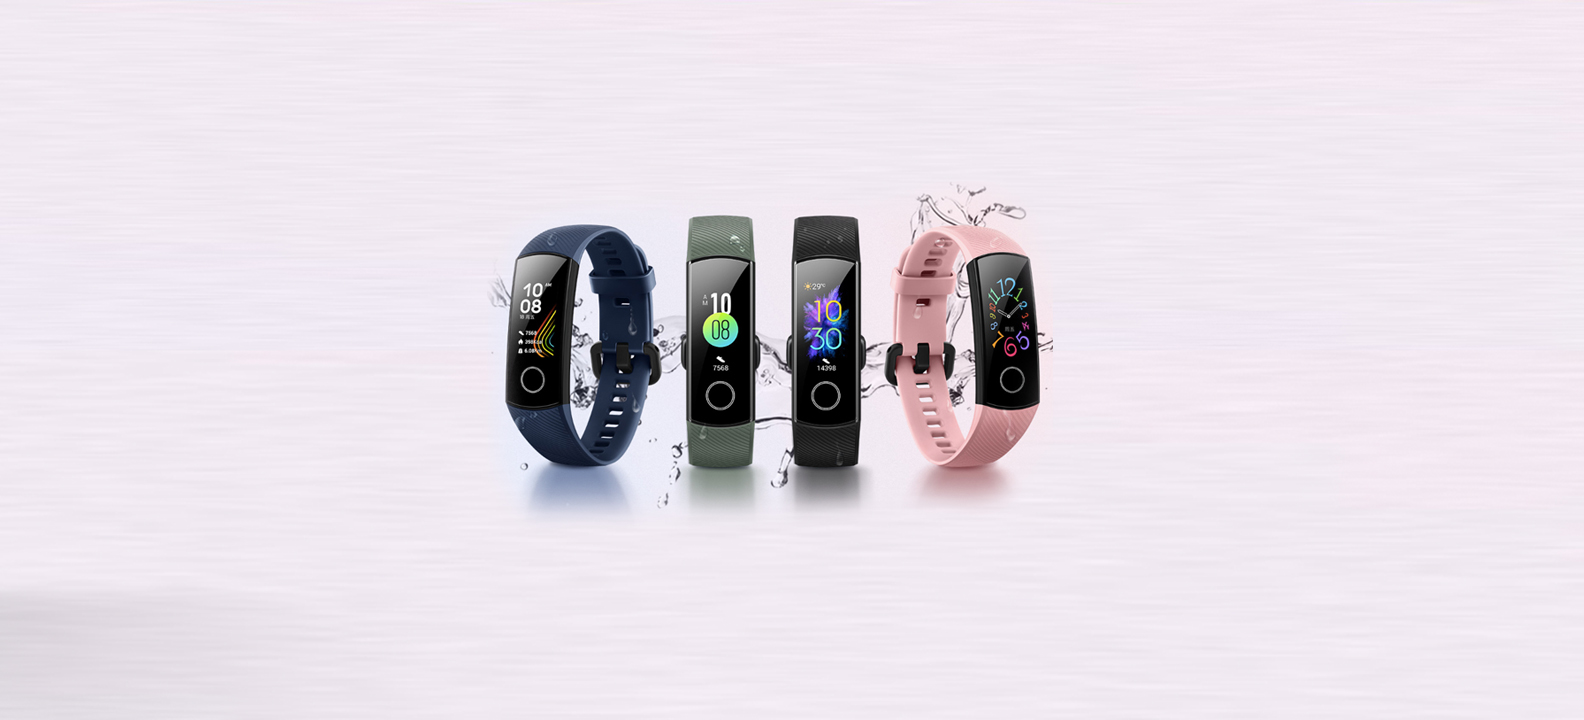 Smart watches and fitness bands